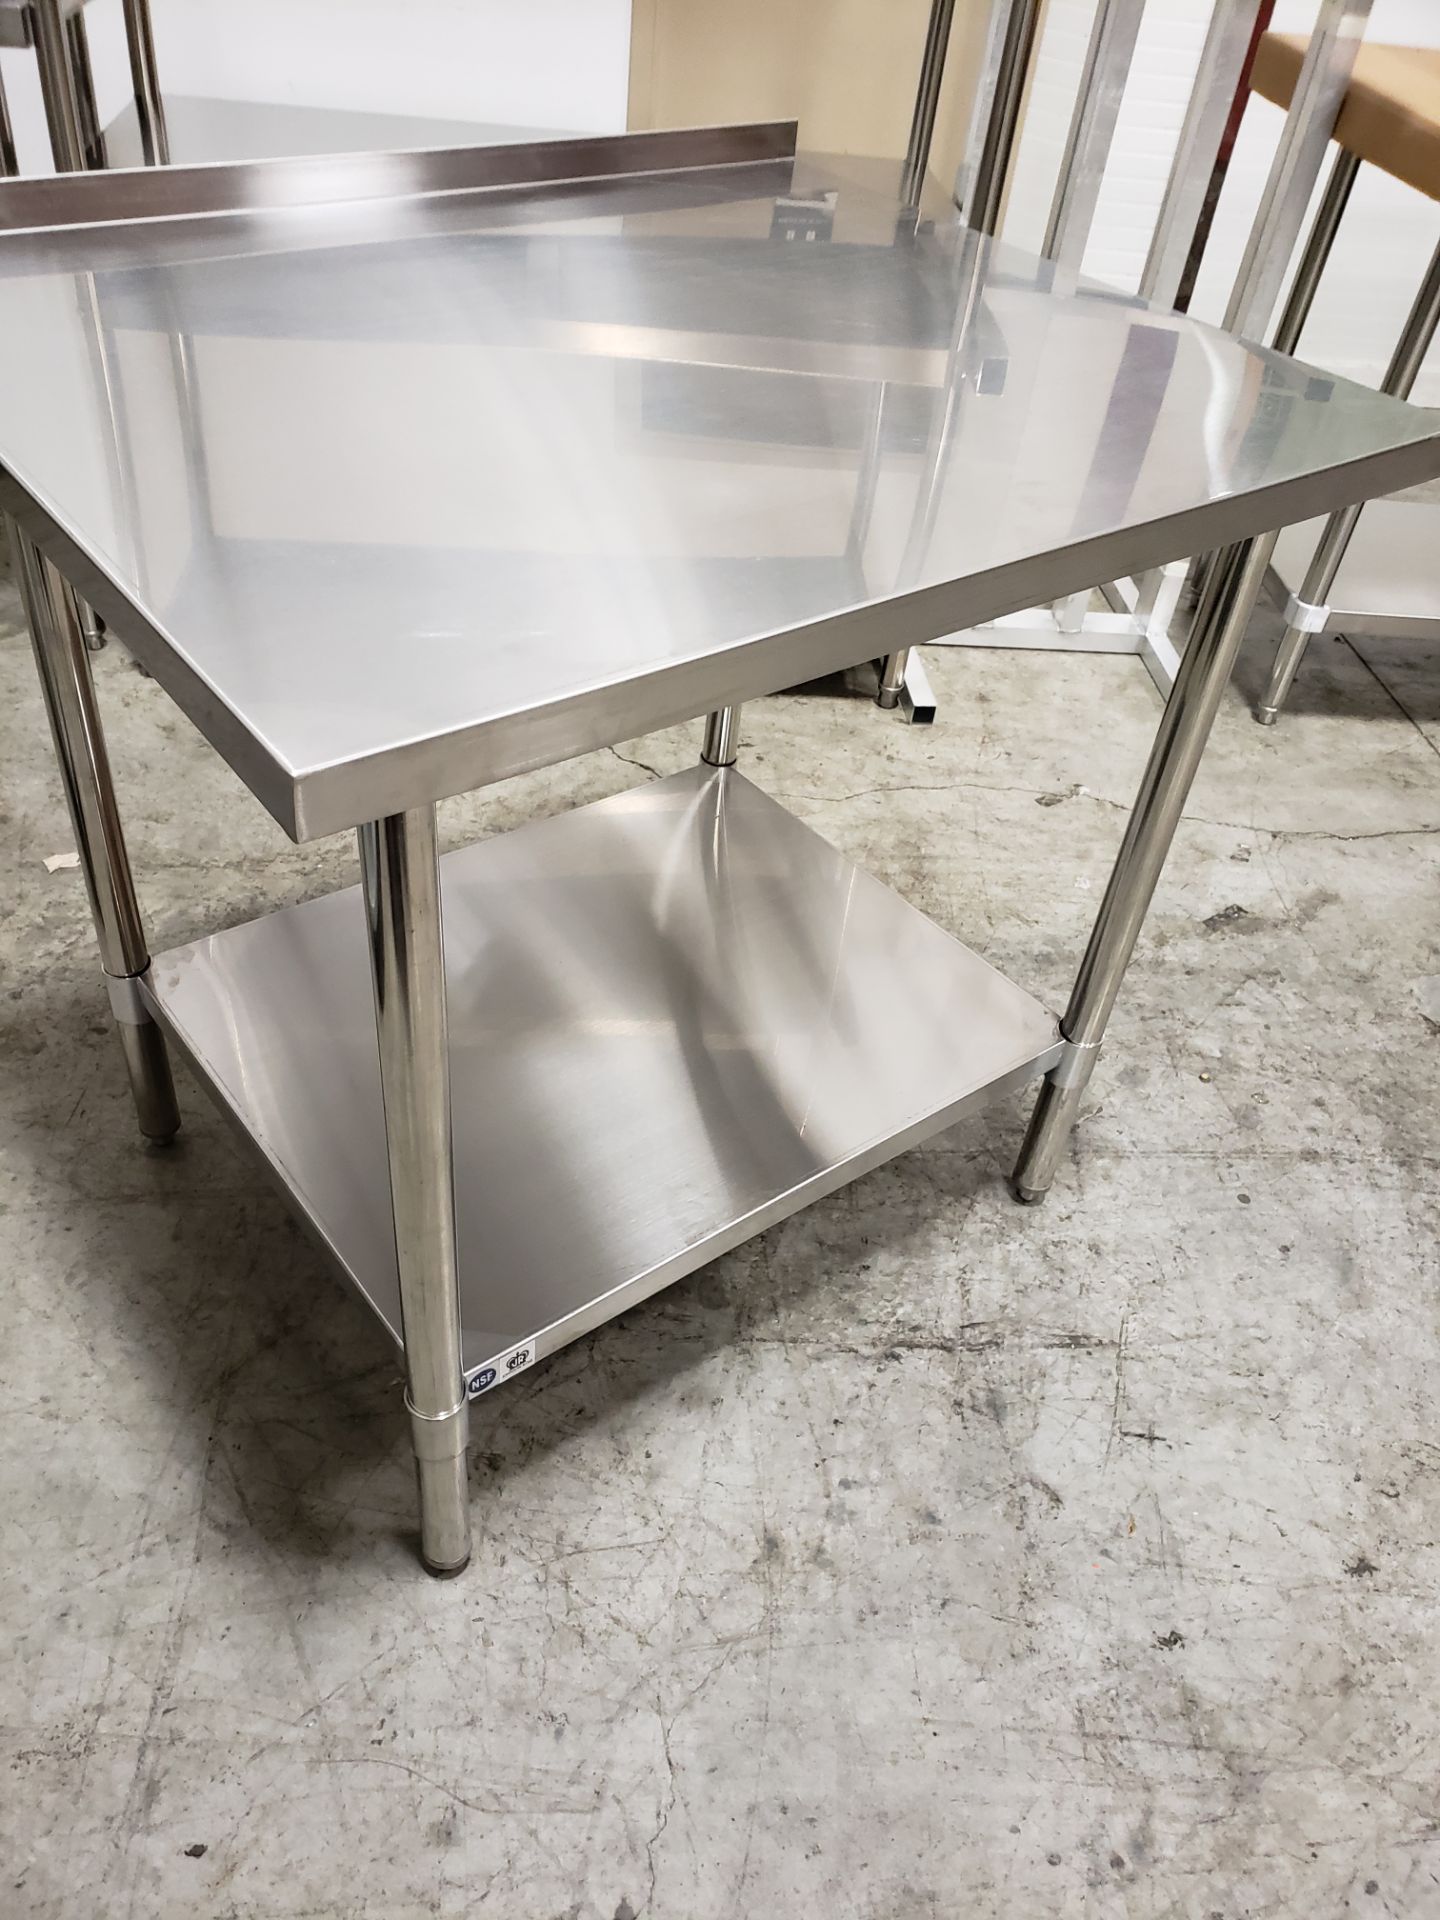 36" x 30" All Stainless Work Table with 1.5" Back Splash - 34" High